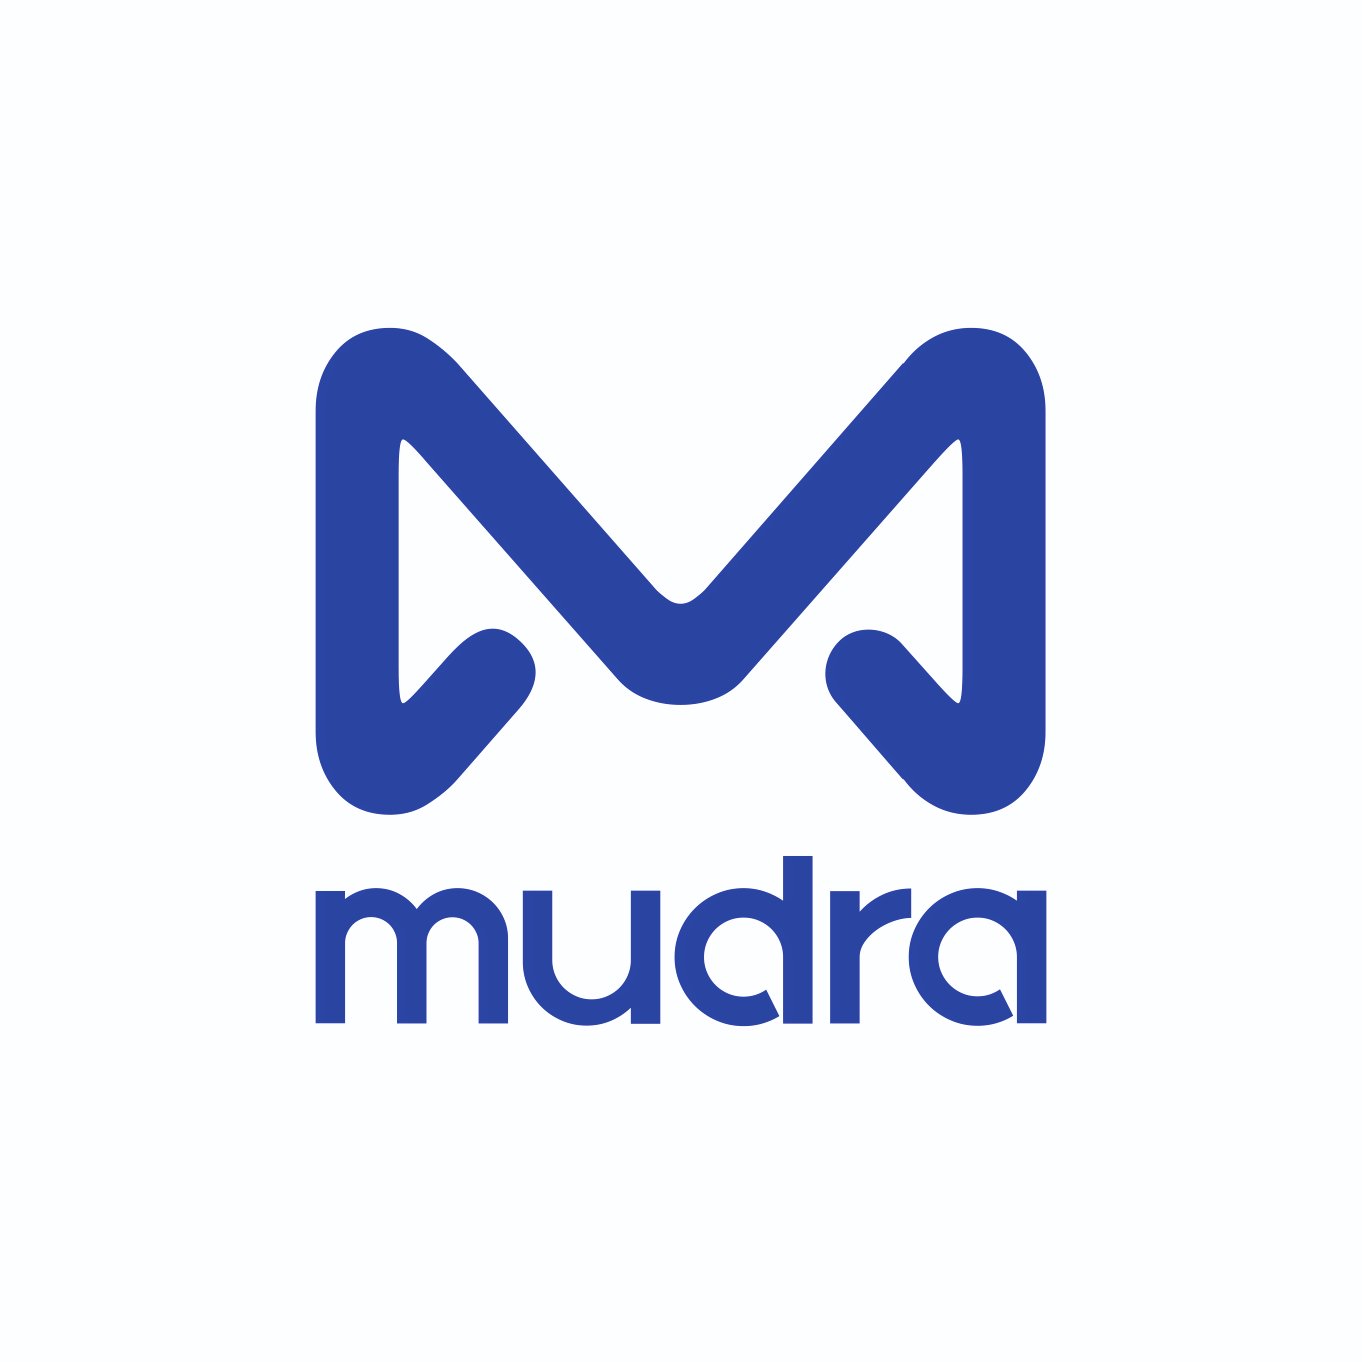 We are Mudra. With crypto market flourishing rapidly, Mudra is our small initiative to get something better out of it. Mudra is a hedge fund of cryptocurrencies